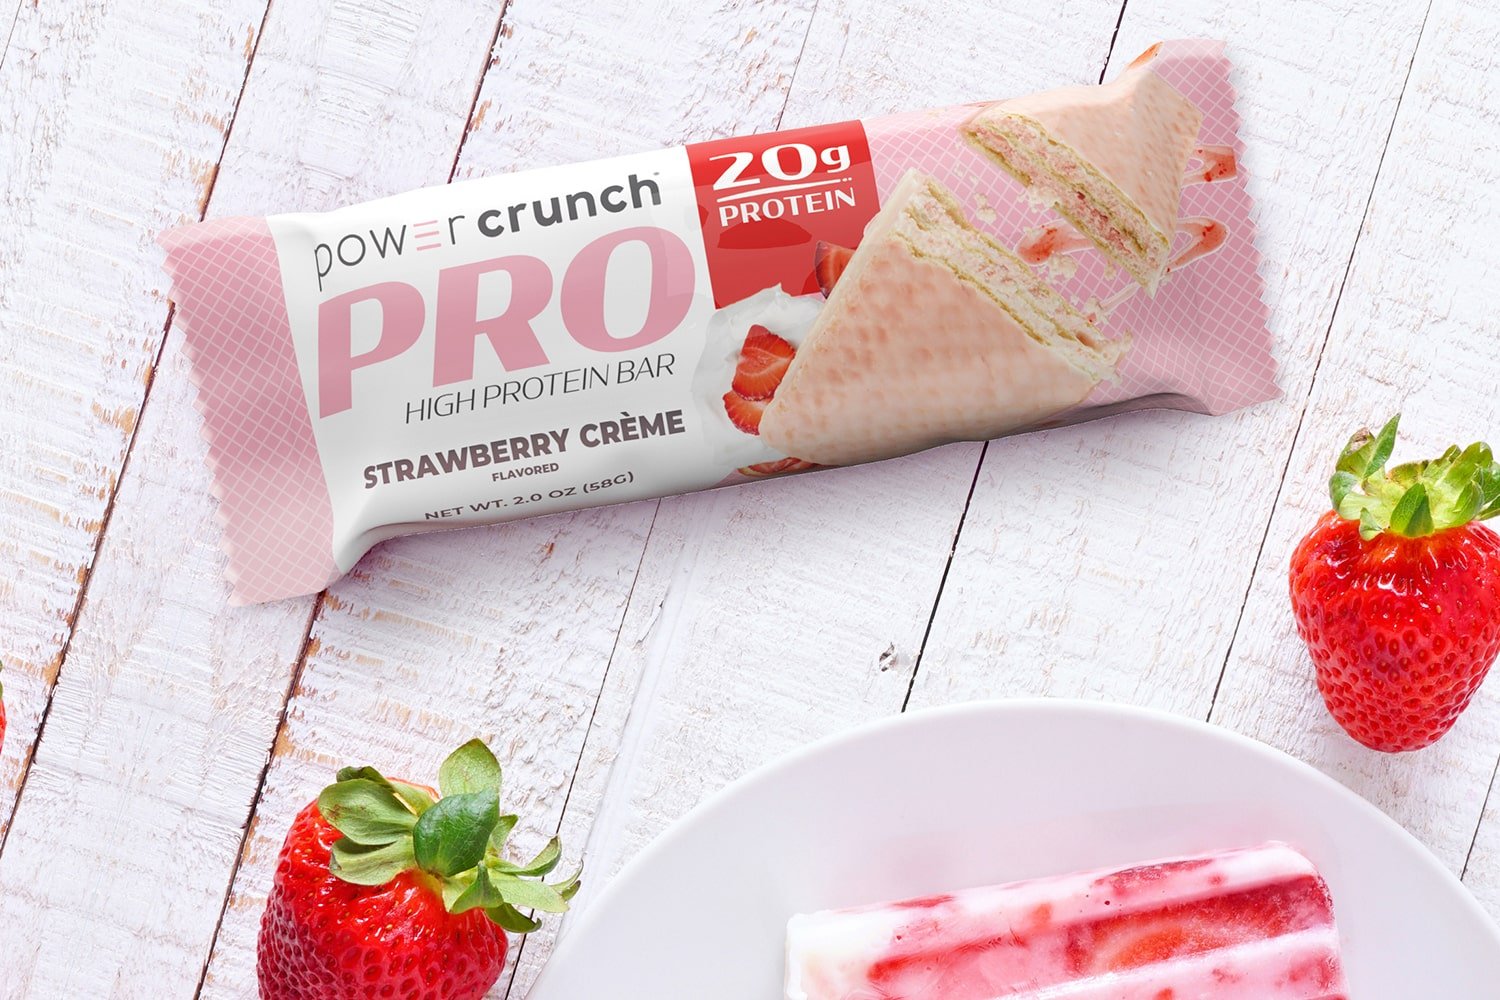 PRO Strawberry 20g protein bars pictured with Strawberry flavor explosion